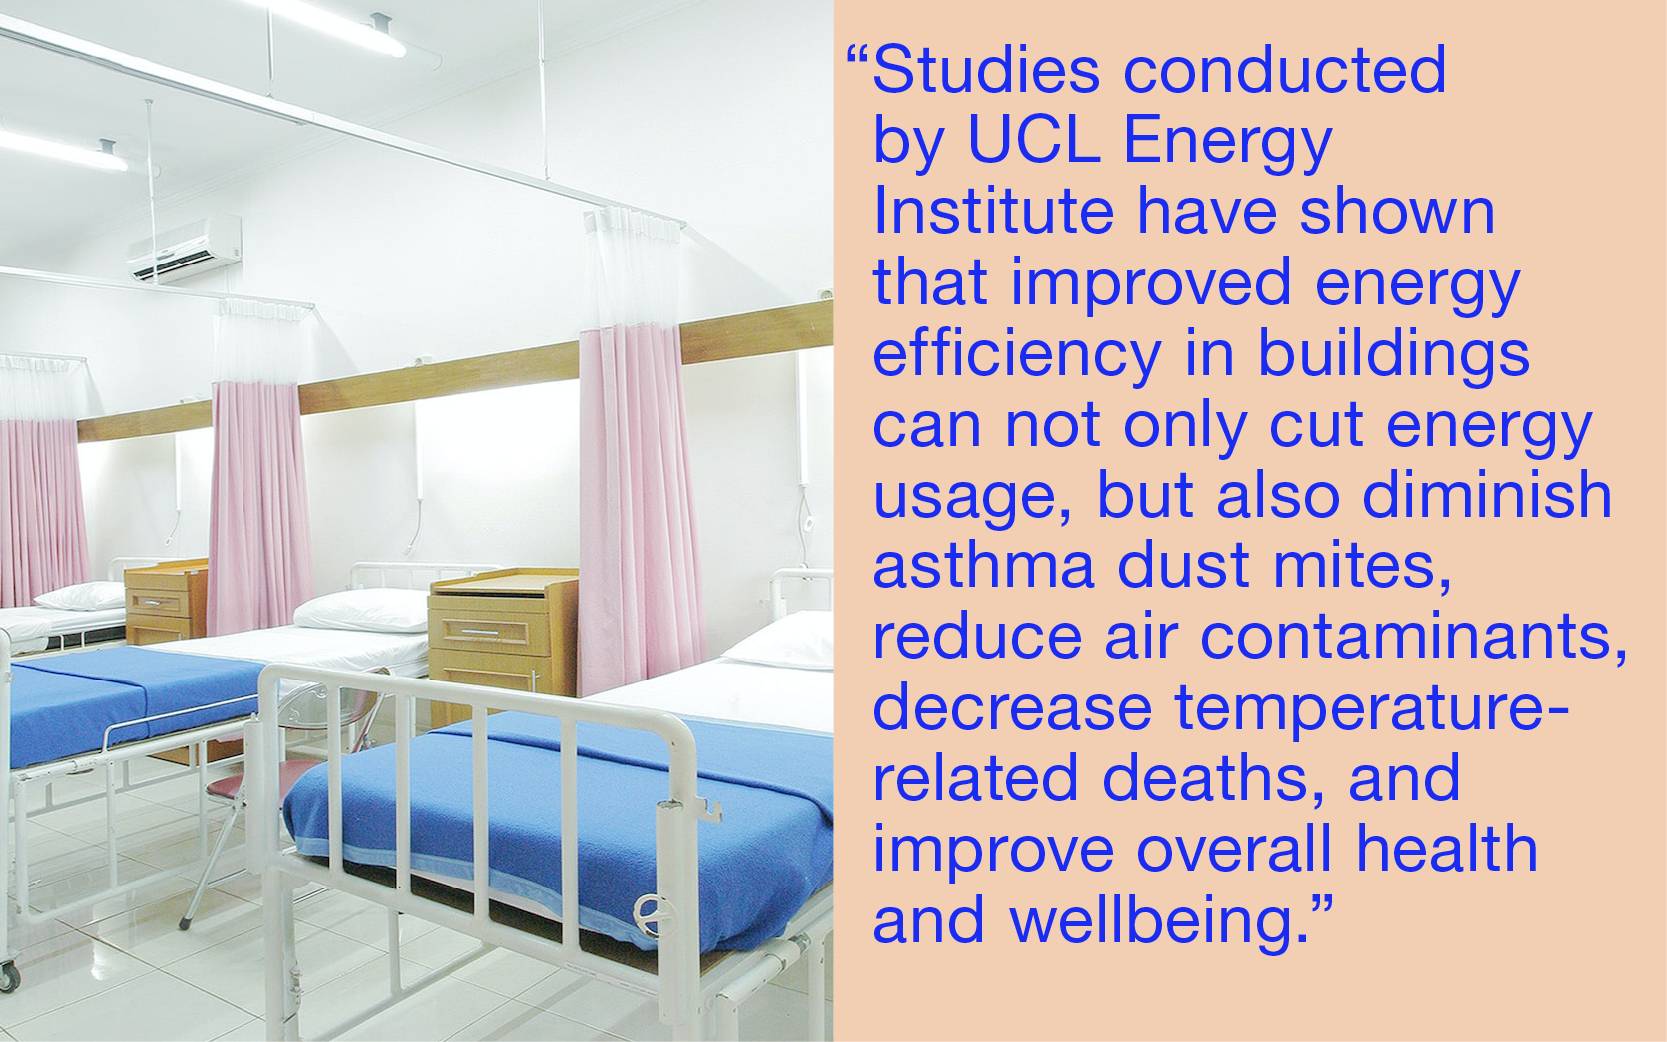 Quote: studies conducted by UCL Energy Institute have shown that improved energy efficiency in buildings can not only cut energy usage, but also diminish asthma dust mites, reduce air contaminants, decrease temperature-related deaths, and improve overall 